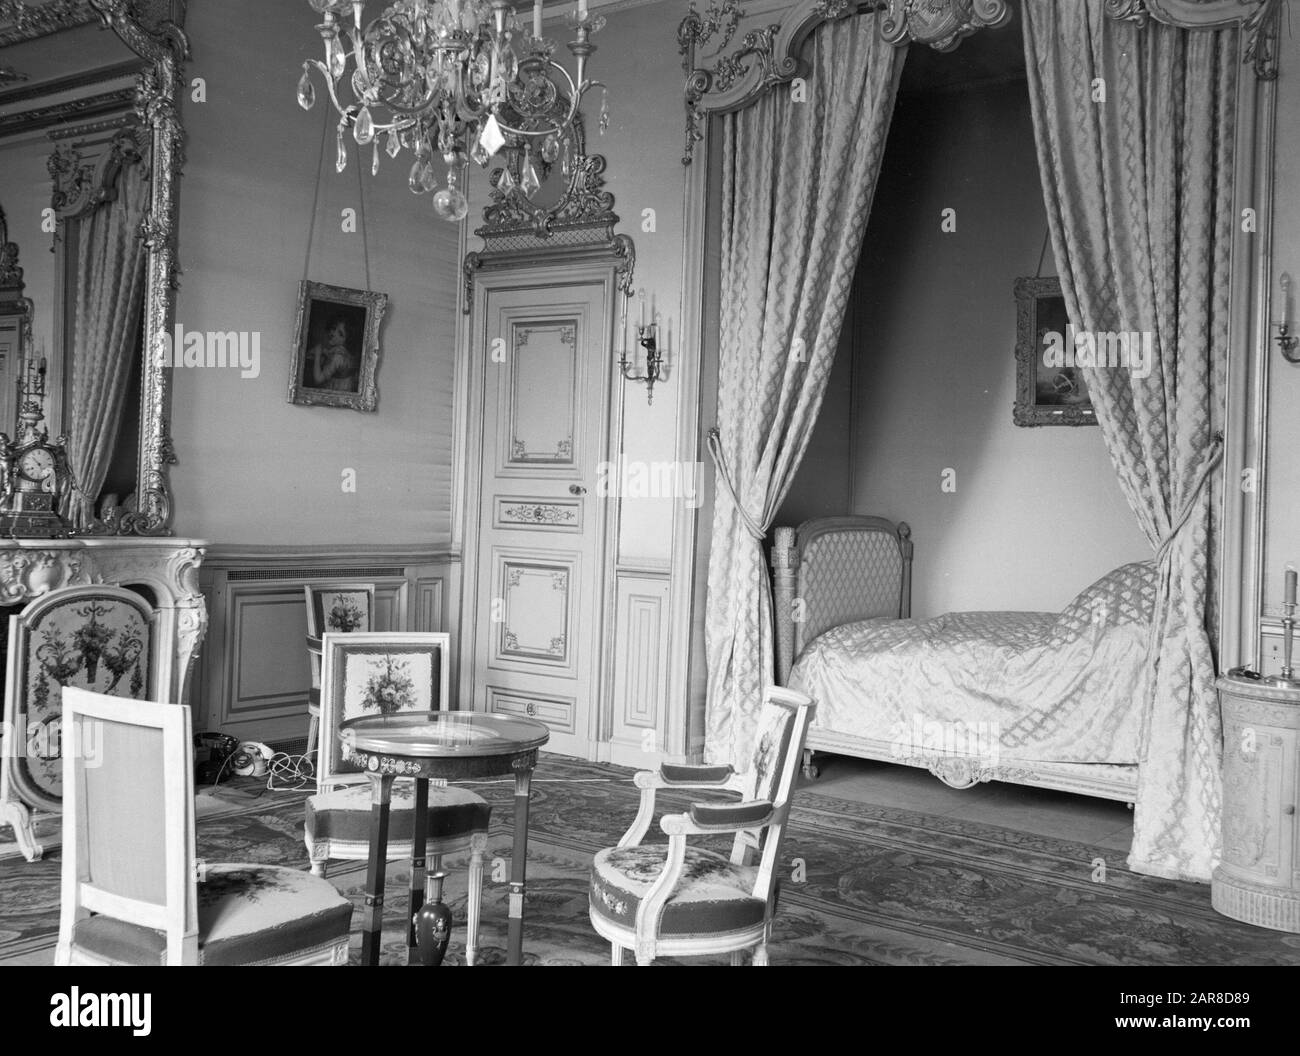 Bedroom in a palace (Elysée in Paris?) Date: 1938 Location: France, Paris Keywords: beds, interior, palaces, bedrooms, mirrors, chairs, tables Institution name: Palais d'Orsay Stock Photo